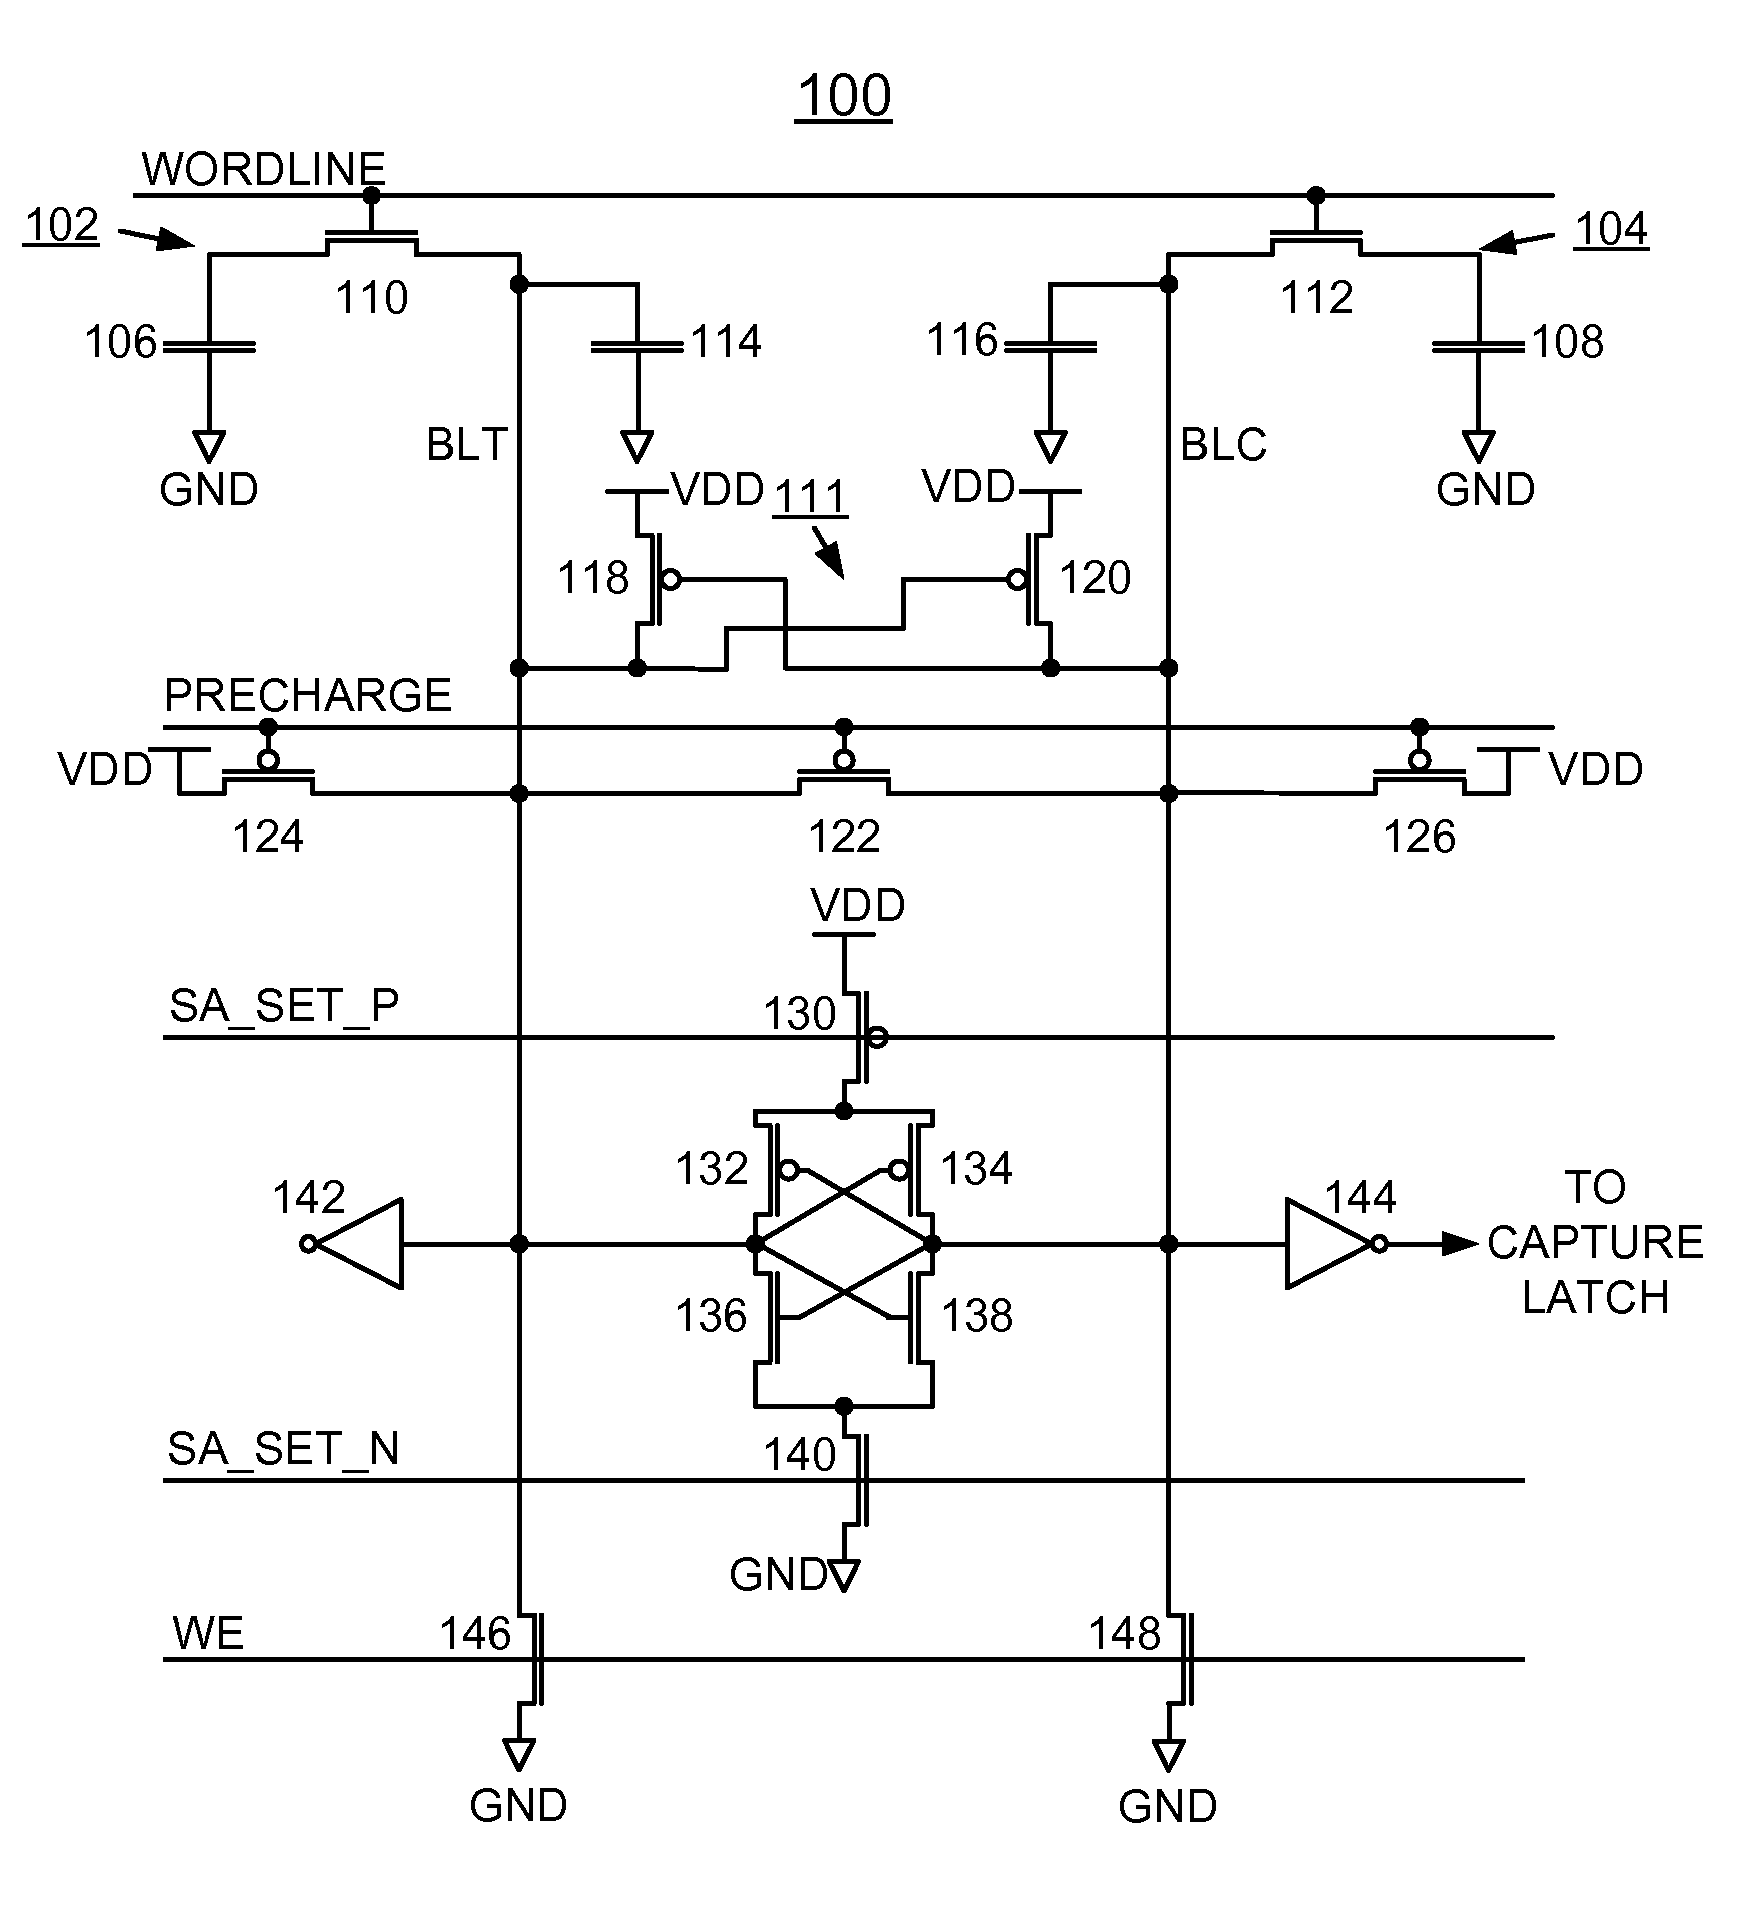 Implementing physically unclonable function (PUF) utilizing EDRAM memory cell capacitance variation